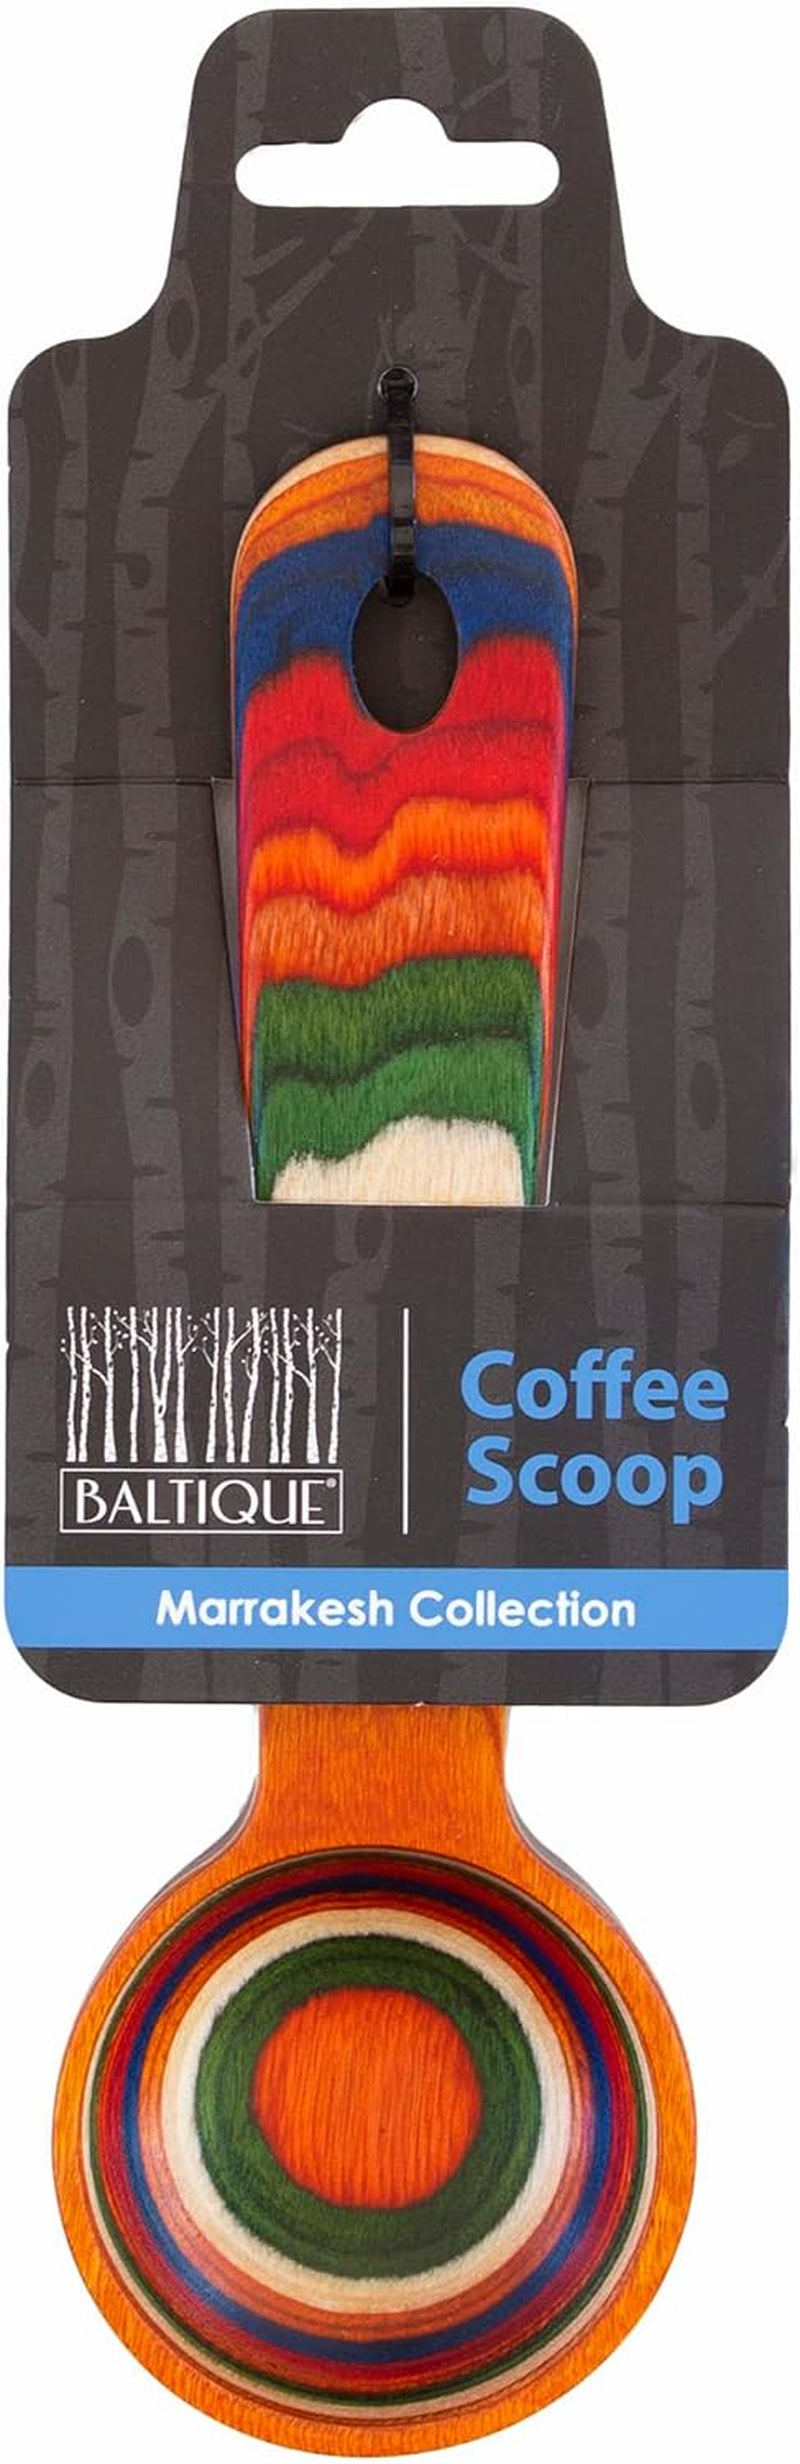 Baltique Marrakesh Collection Wooden Coffee Scoop for Ground Coffee